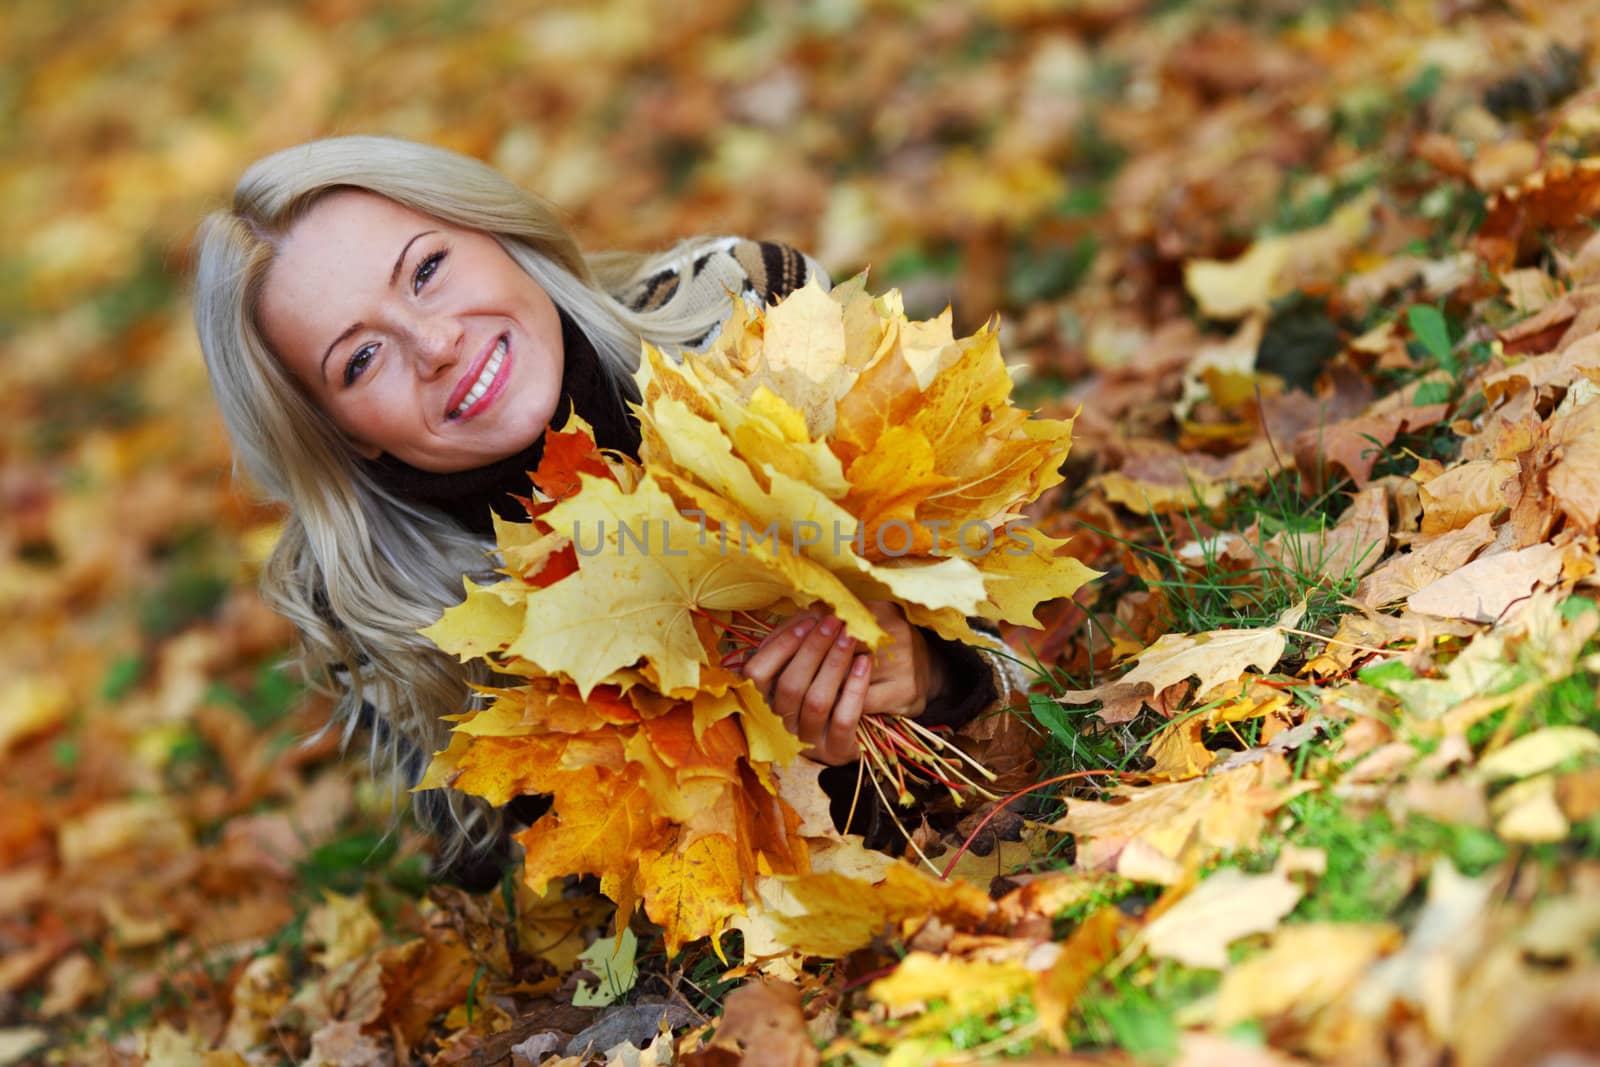  woman portret in autumn leaf close up